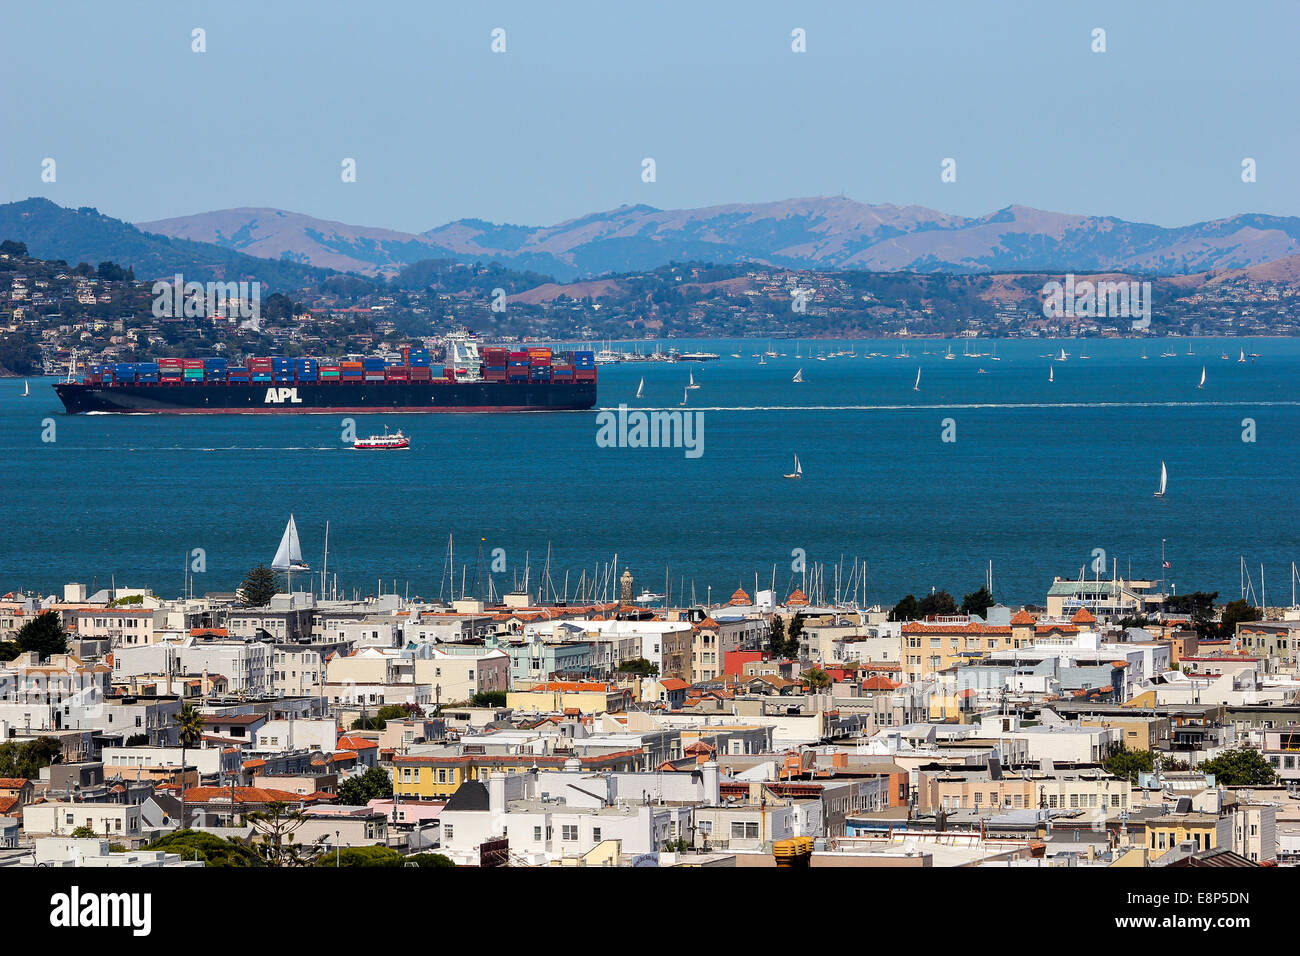 Looking out towards a container ship in San Francisco Bay from the Pacific Heights neighborhood Stock Photo